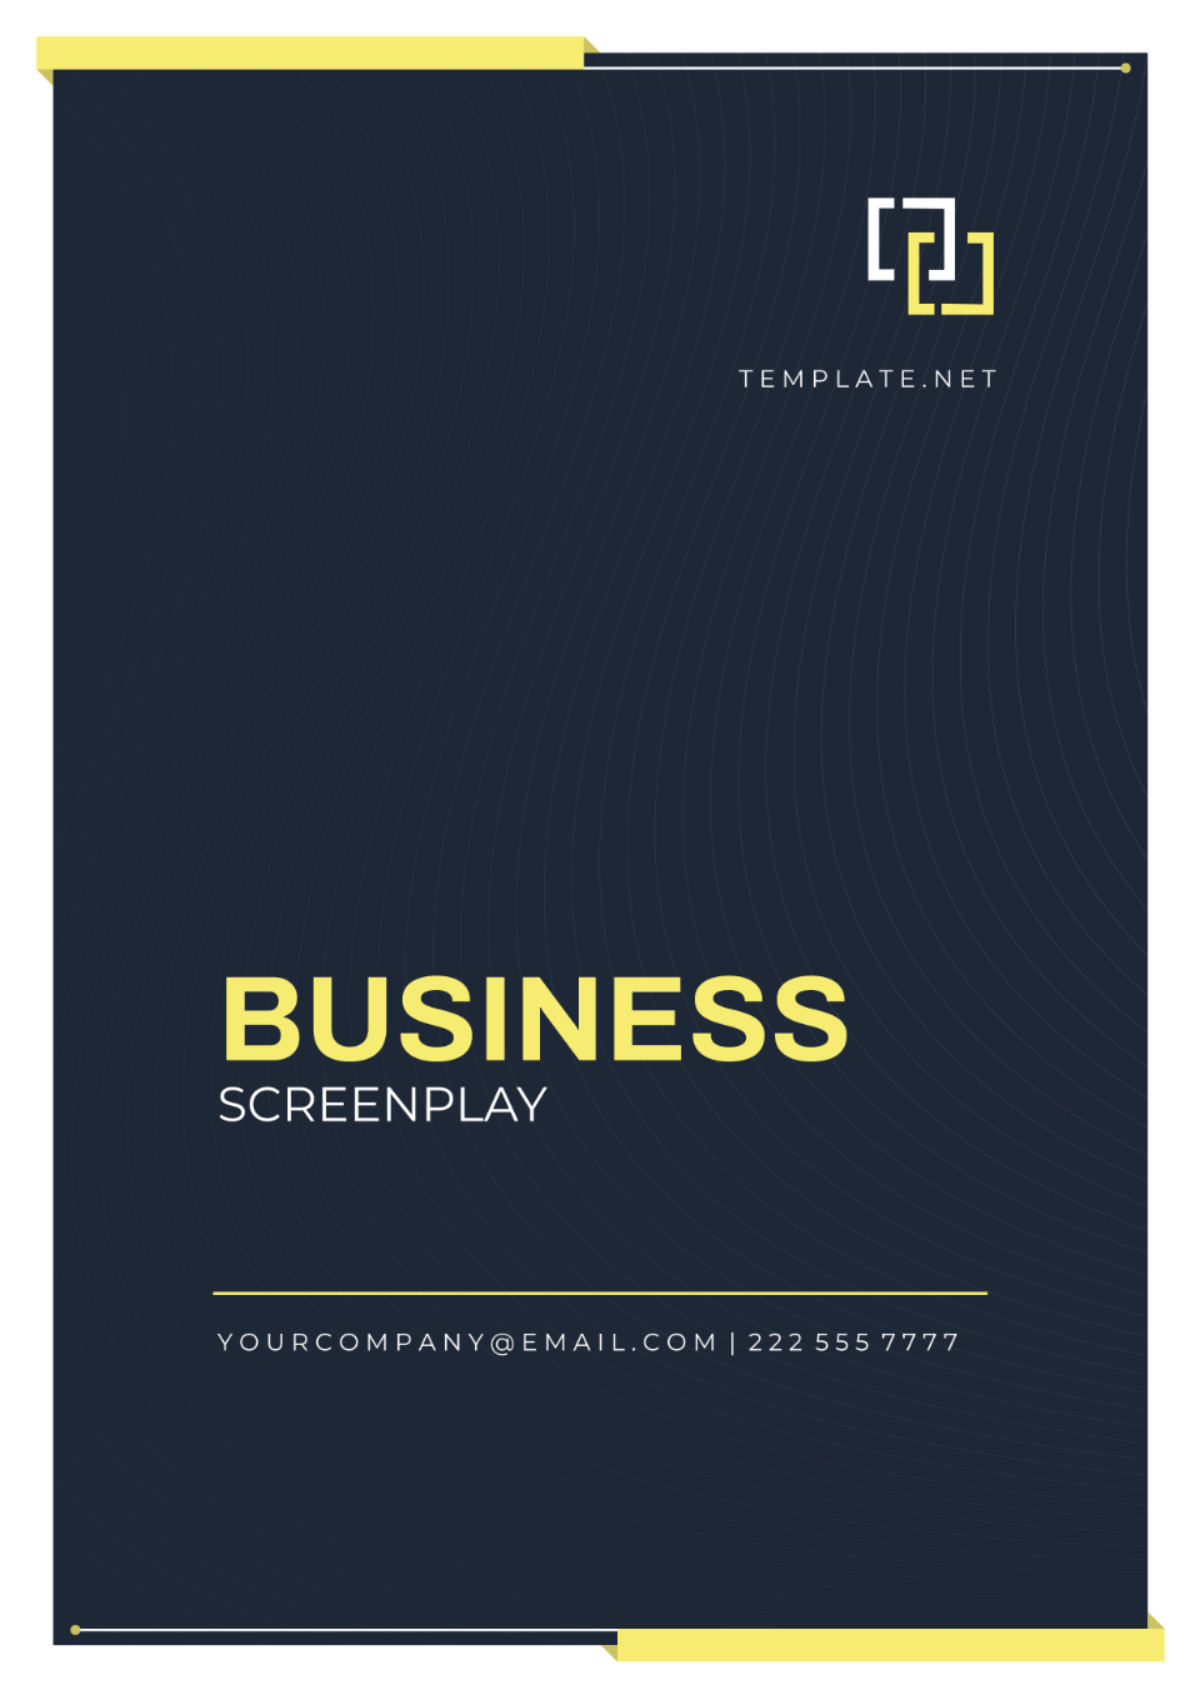 Business Screenplay Template